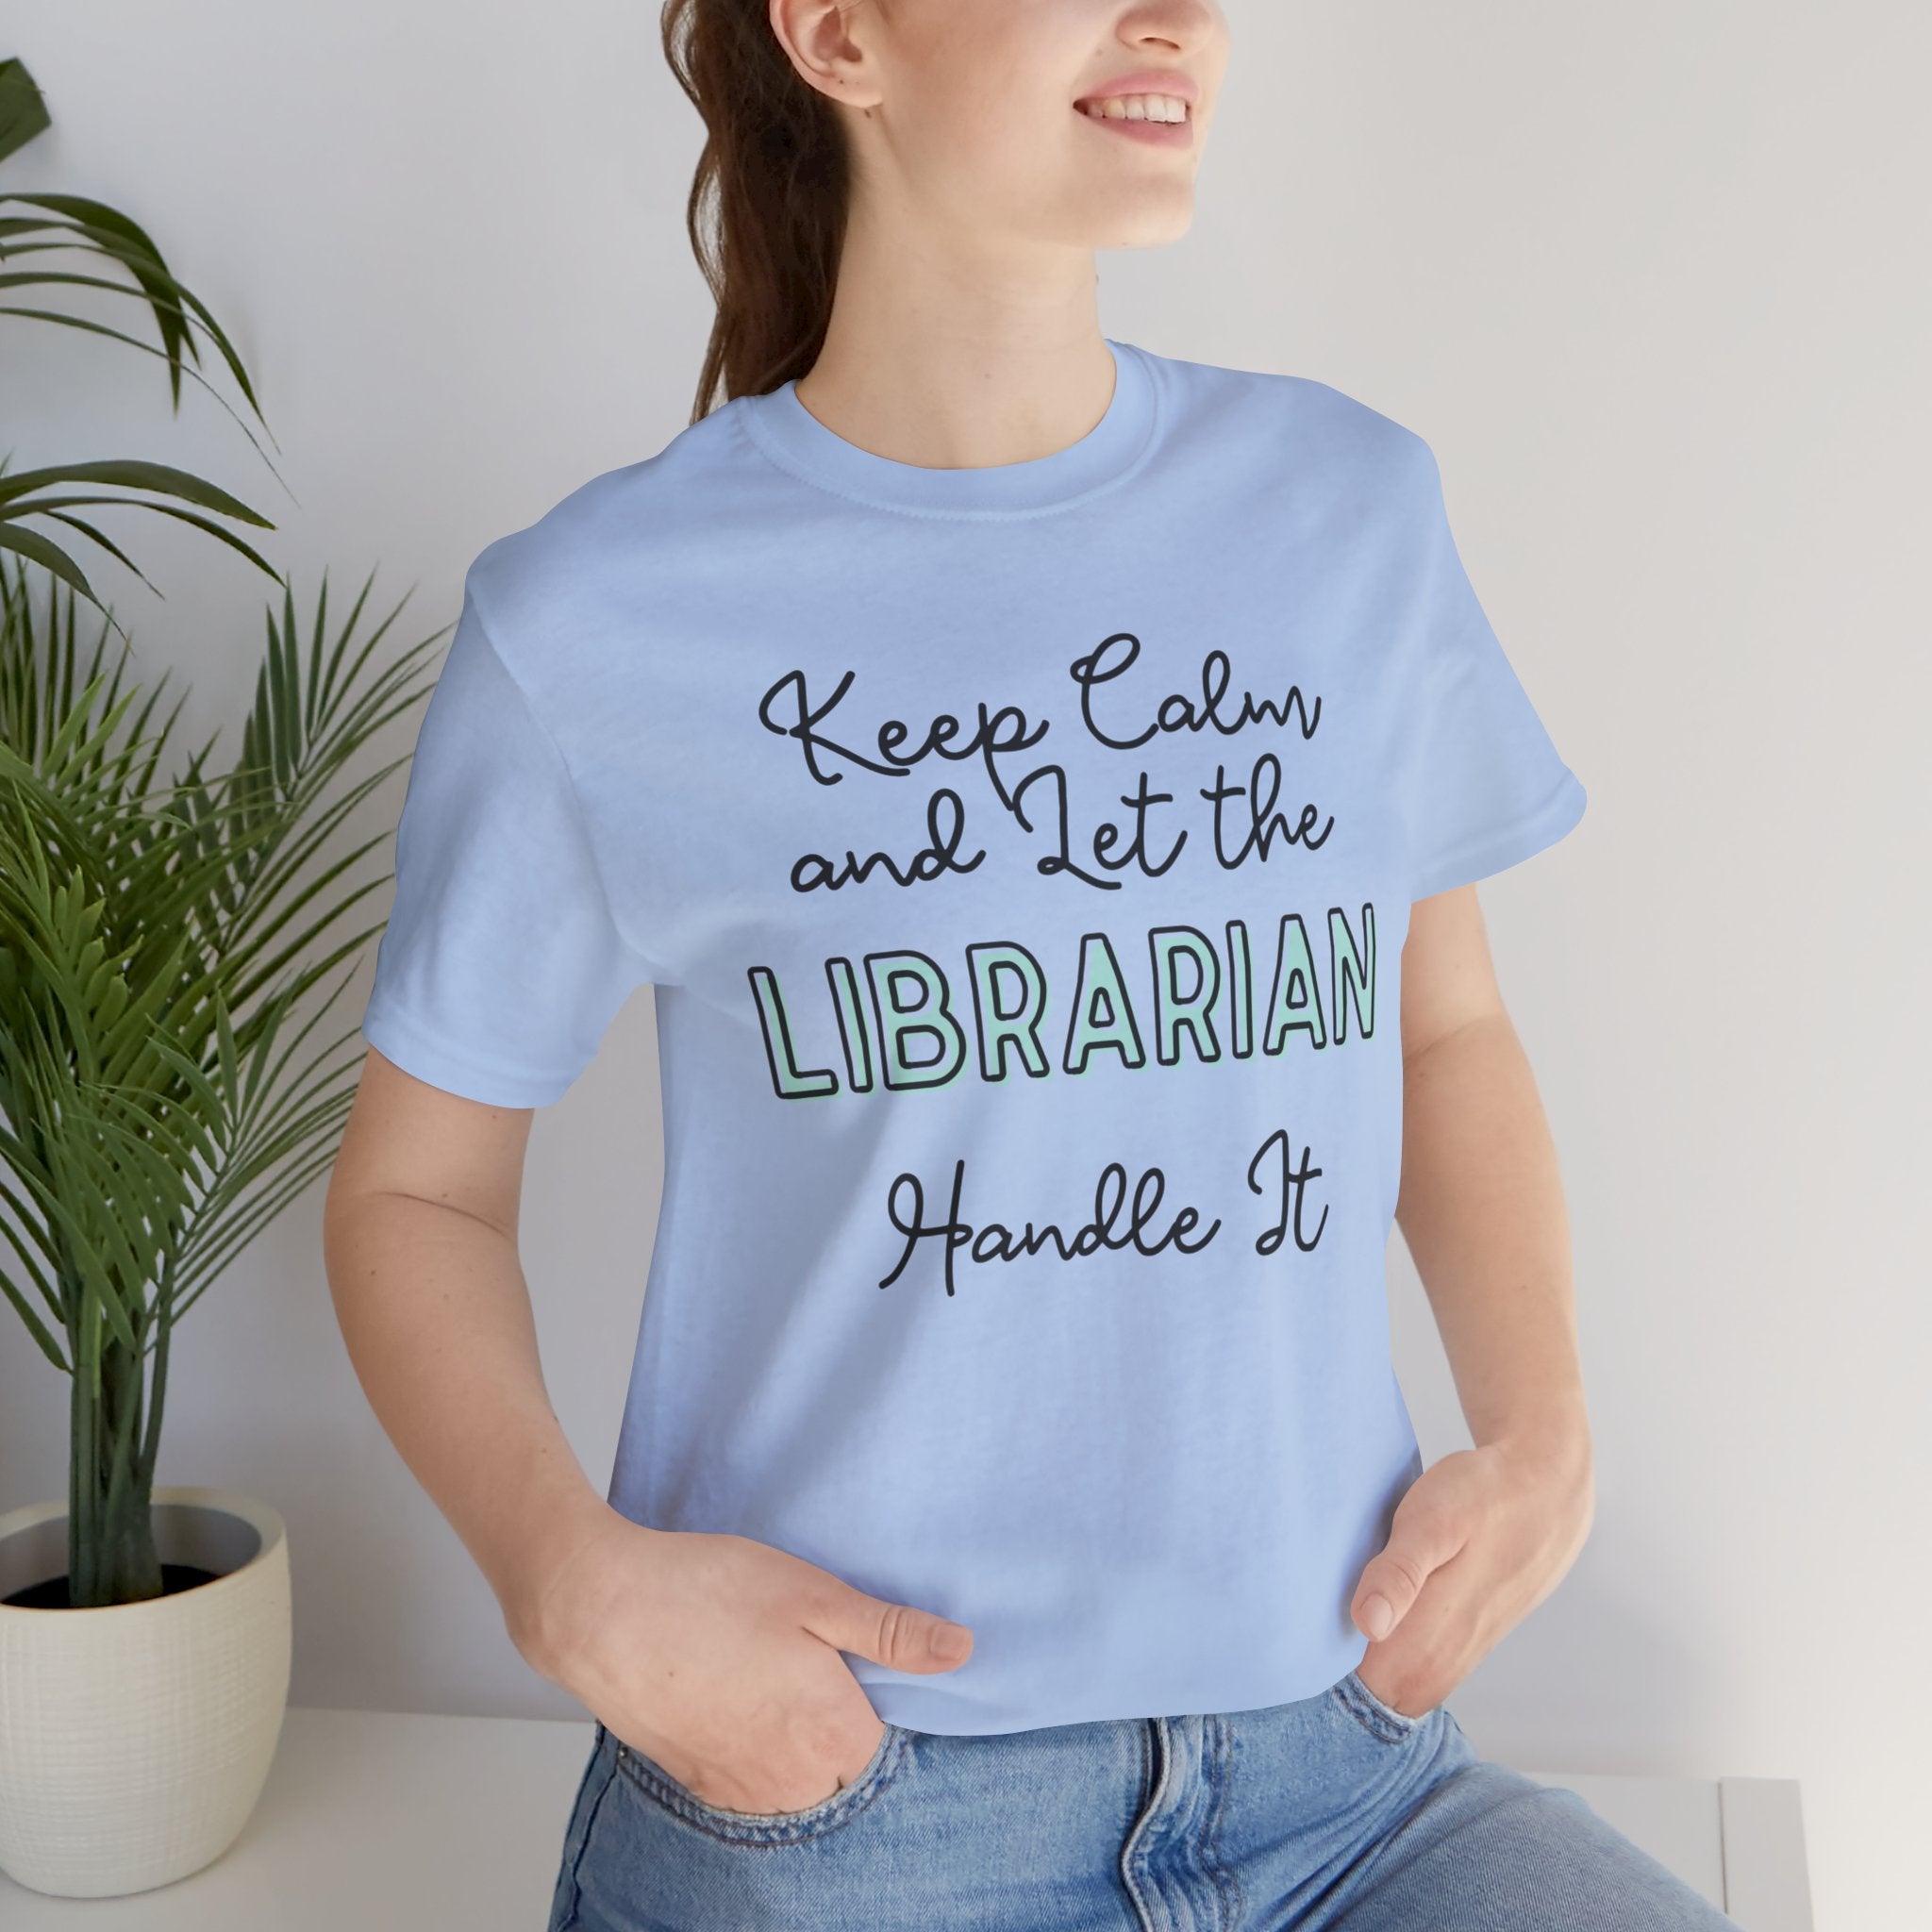 Keep Calm and let the Librarian handle It - Jersey Short Sleeve Tee